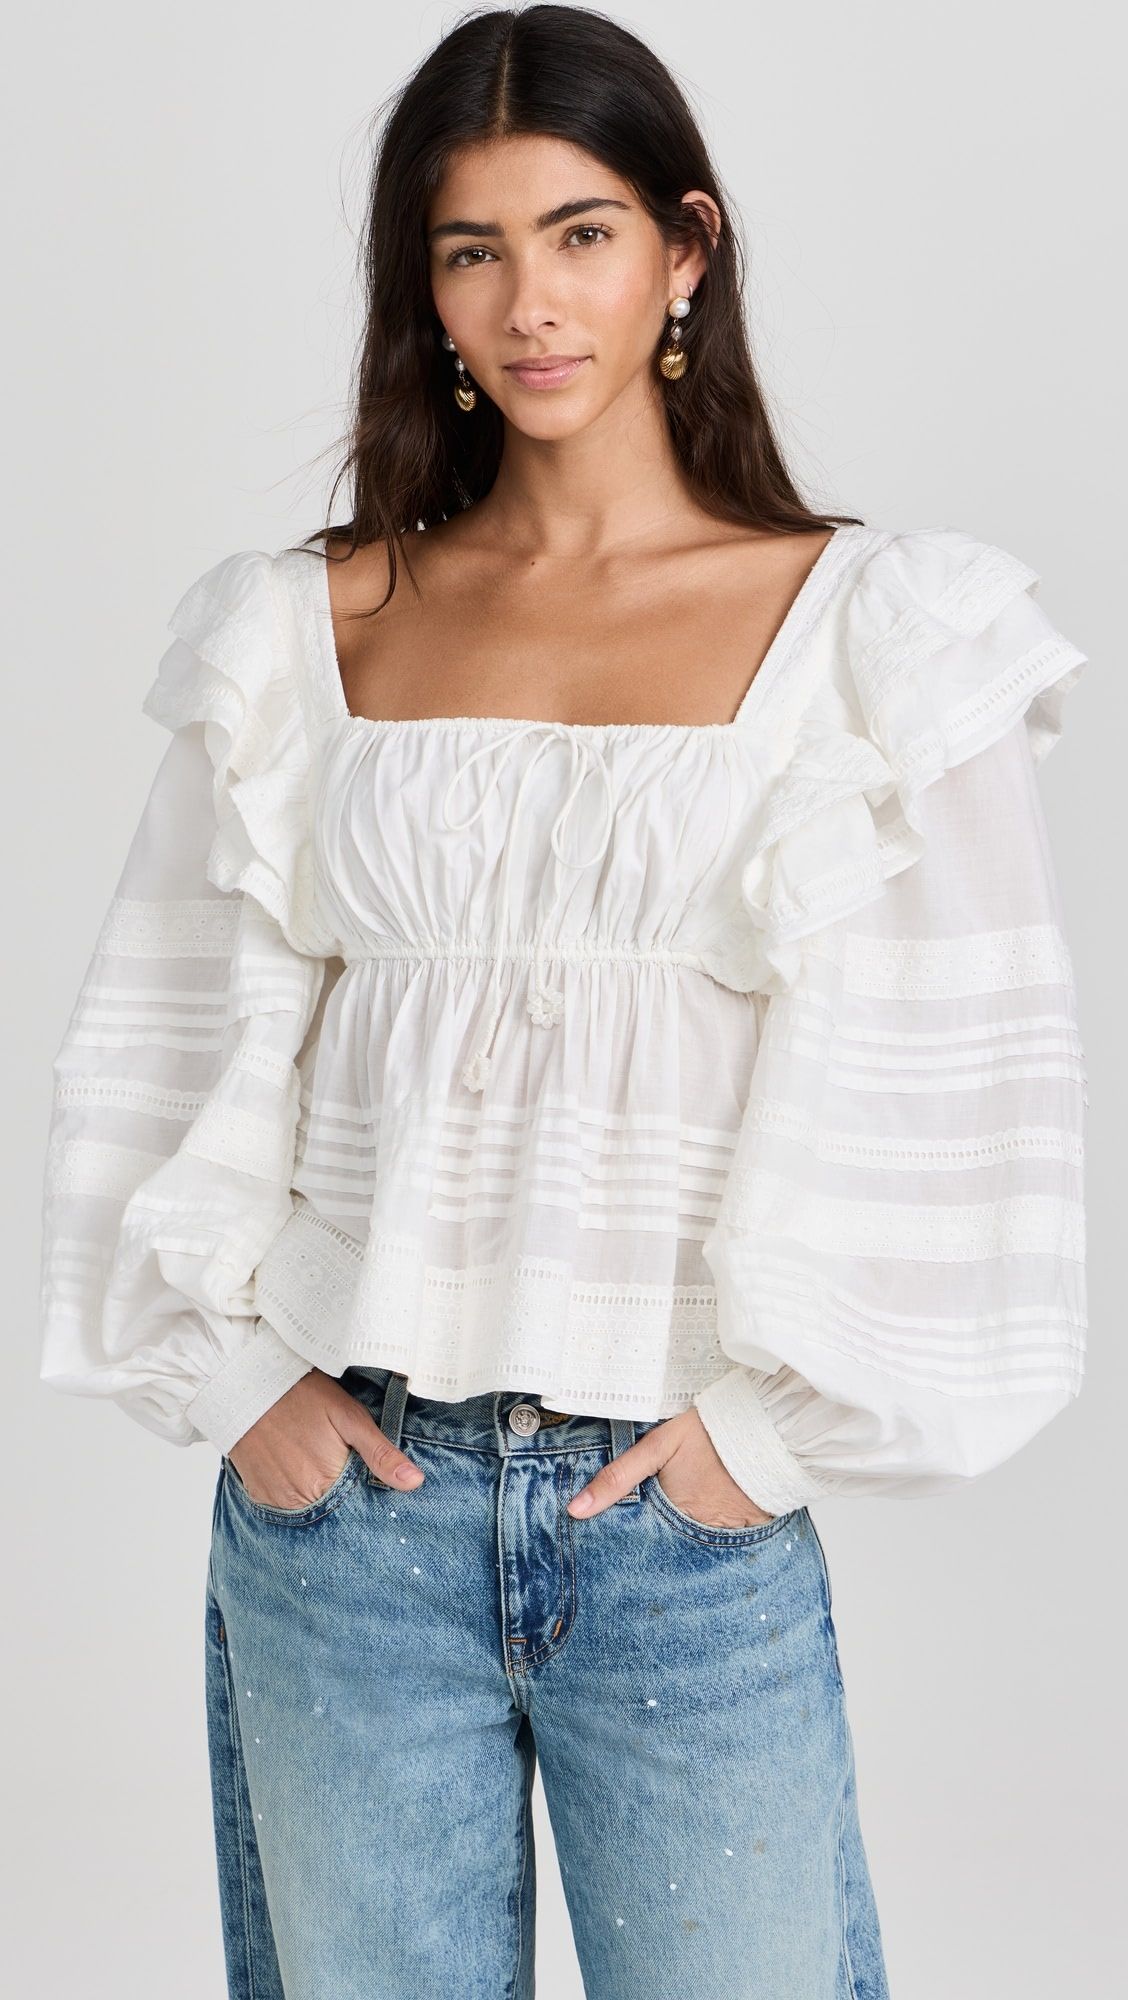 Off-White Squared Neckline Long Sleeves Blouse | Shopbop